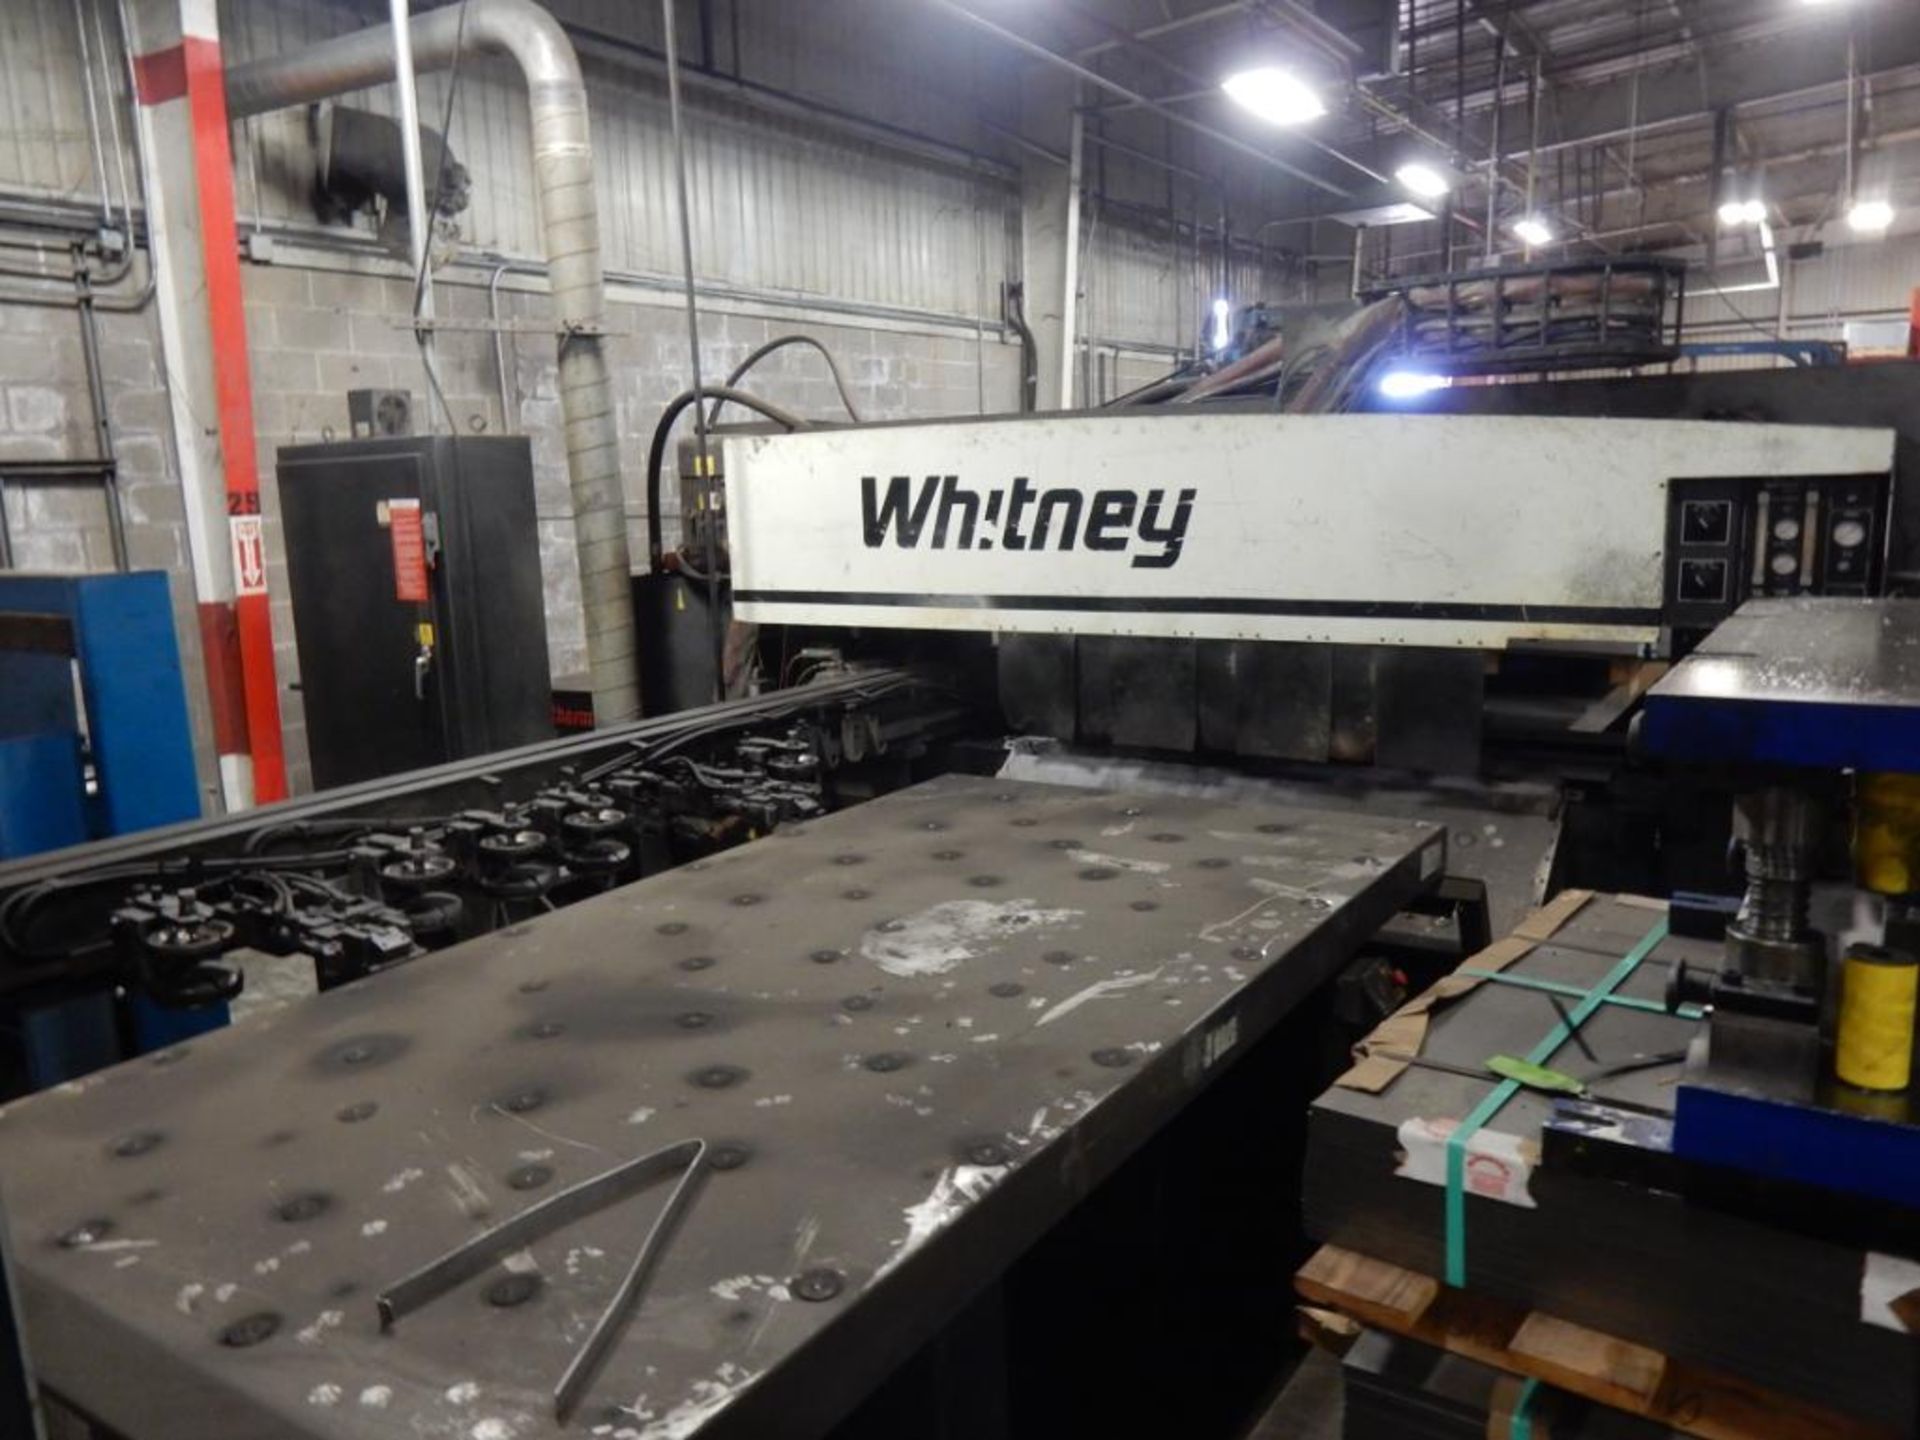 WHITNEY CNC PUNCH, M# 681-325, S/N 44627, 40 TON CAP., SIEMENS SINUMERIC CNC CONTROLS, APPROX. 5' X - Image 2 of 3